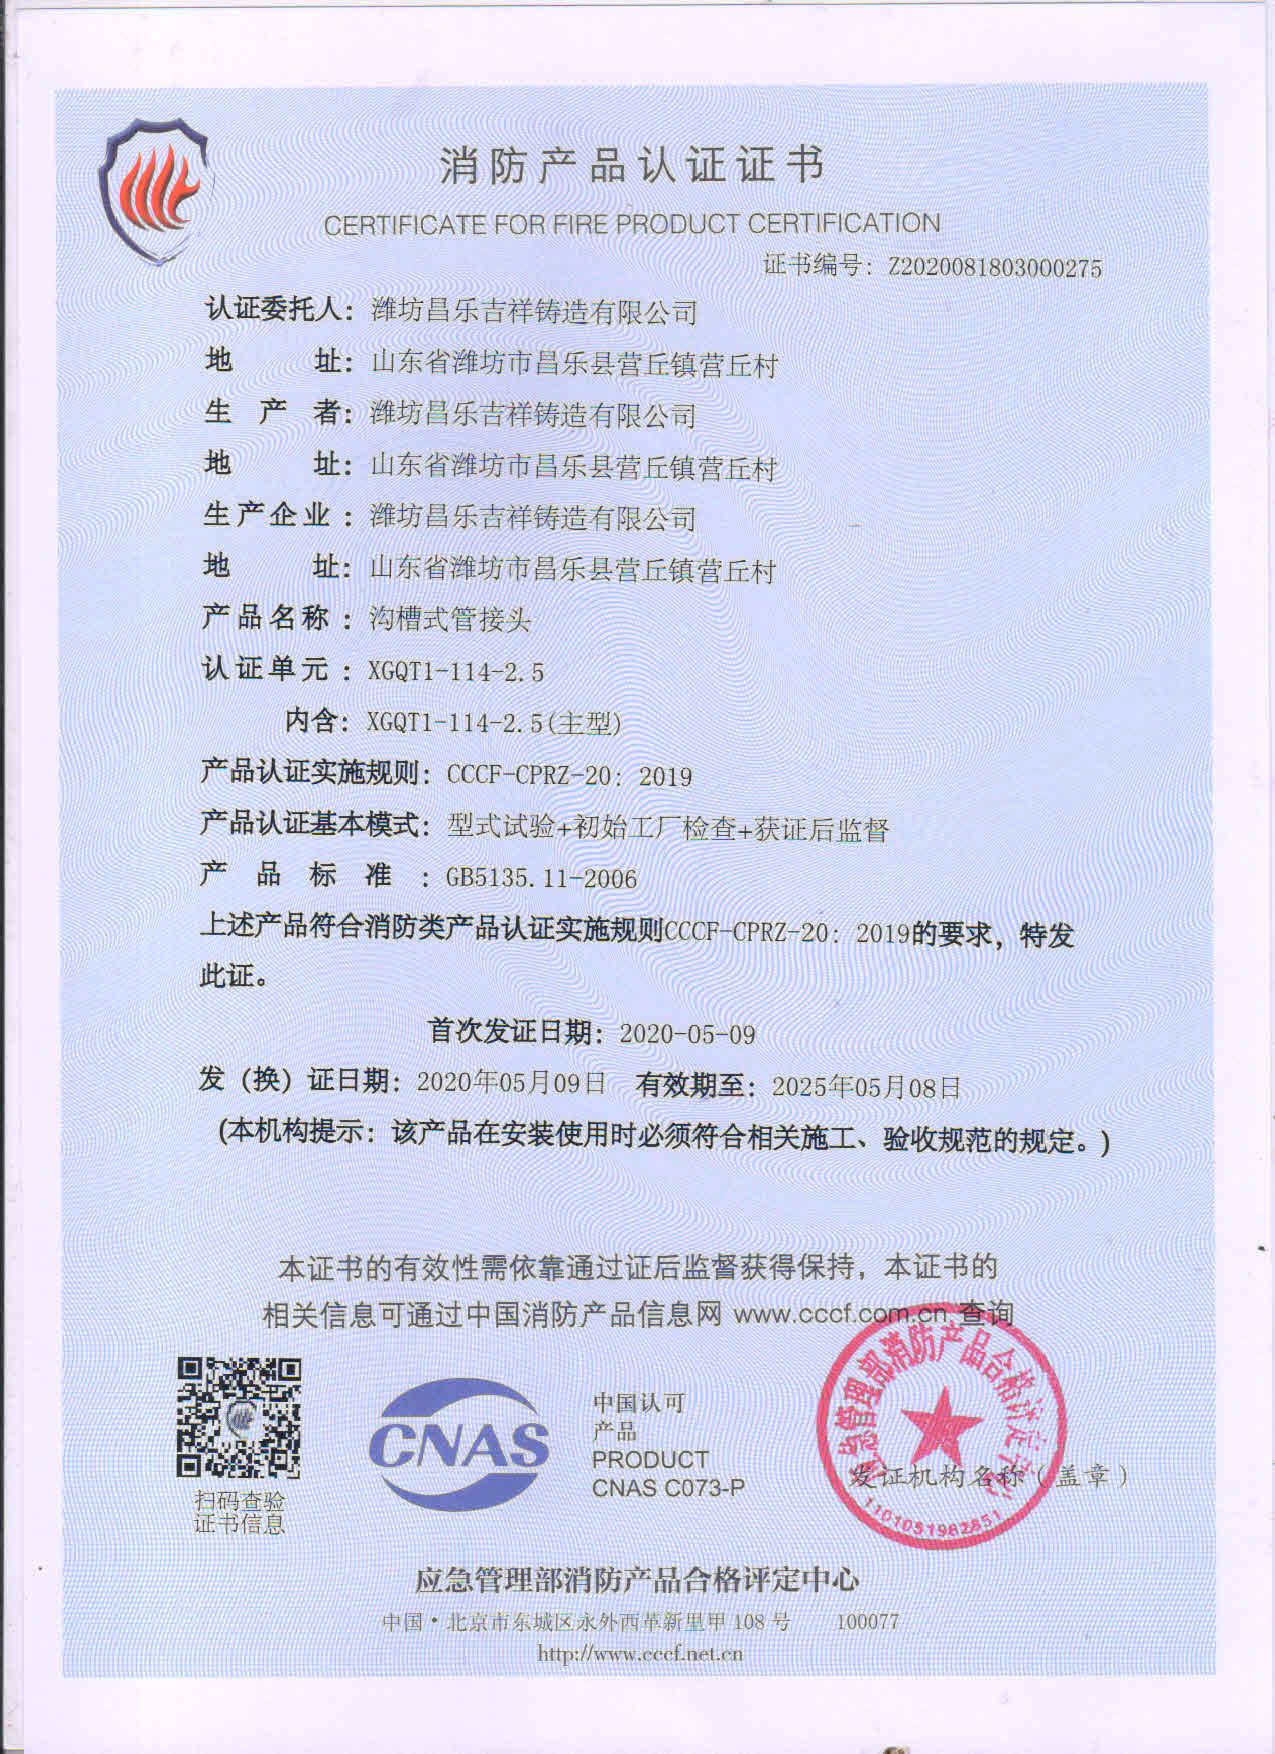 Certificate for Fire Product Certification 